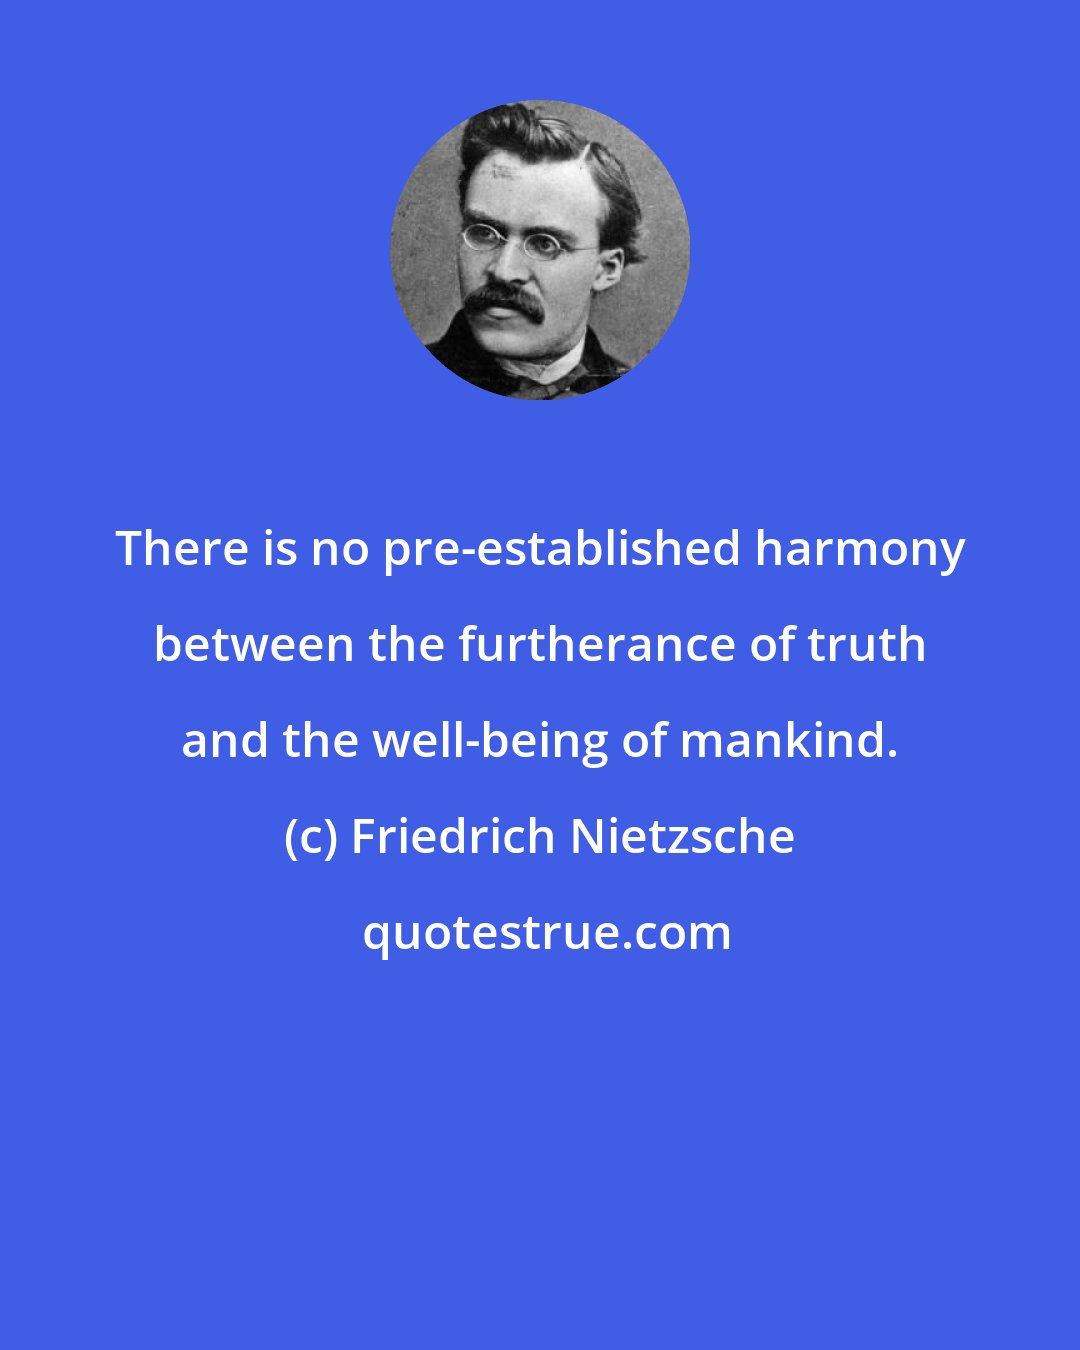 Friedrich Nietzsche: There is no pre-established harmony between the furtherance of truth and the well-being of mankind.